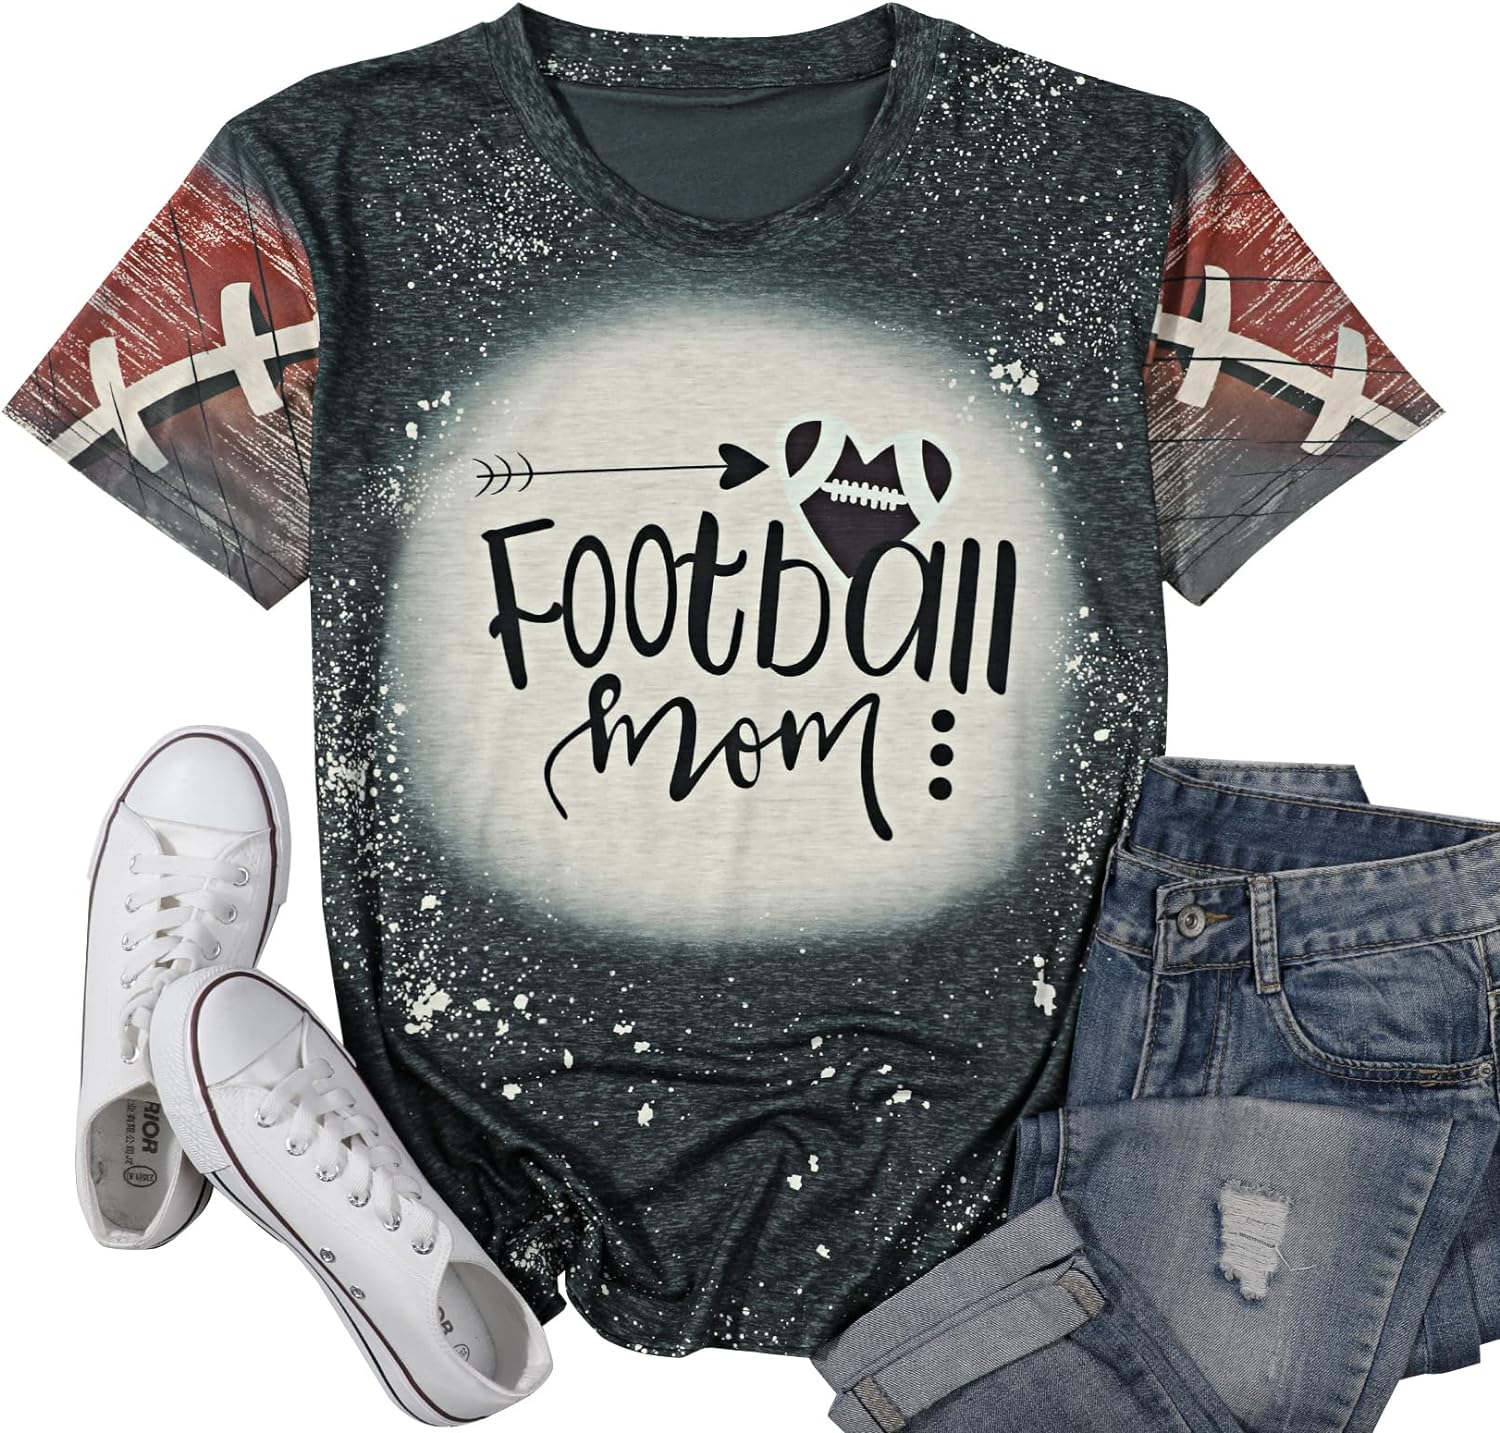 Football Mom T Shirts Women Love Heart Football Tee Shirts Casual Short Sleeve Game Day Tee Tops with Saying Loose Top